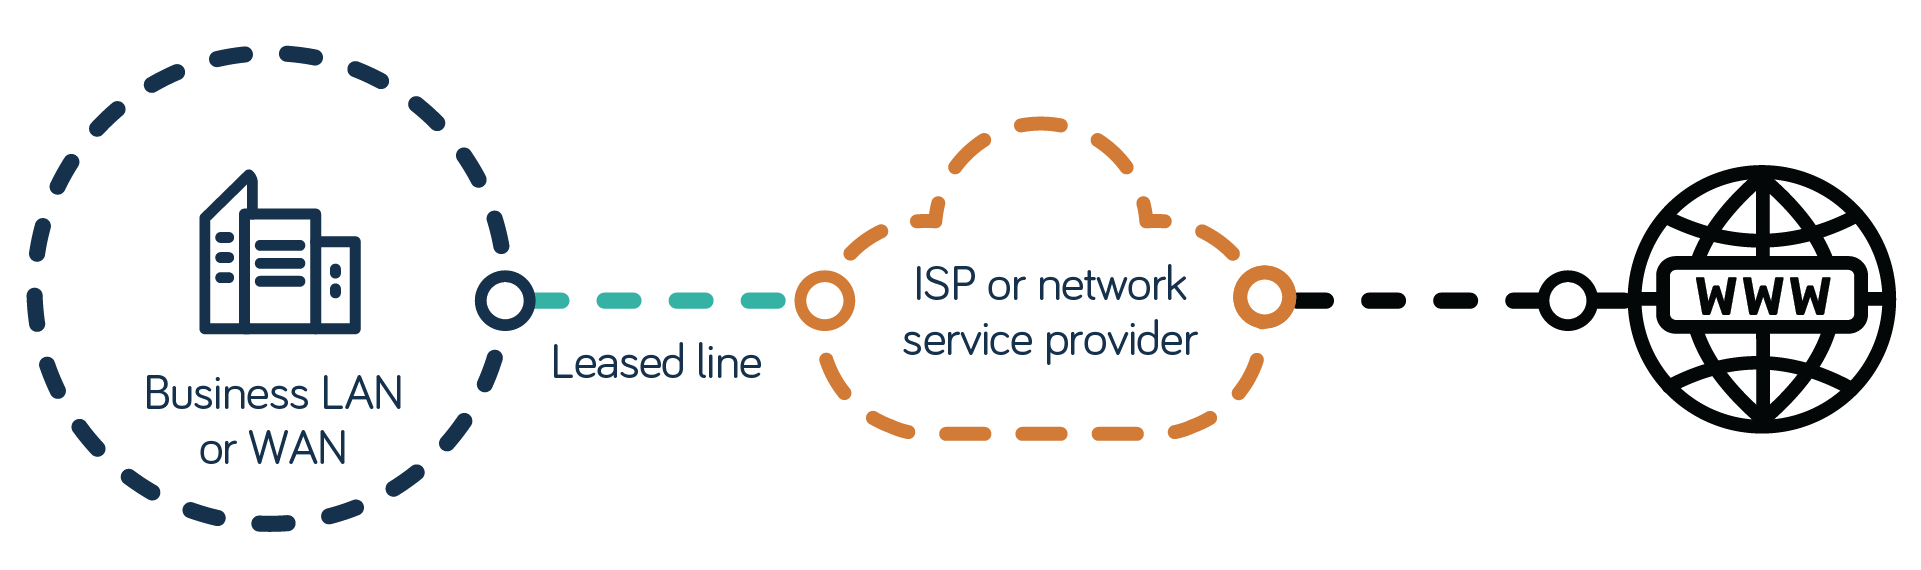 Dedicated internet access diagram, showing how DIA connects your business LAN or WAN to the internet via a leased line to your ISP or network service provider